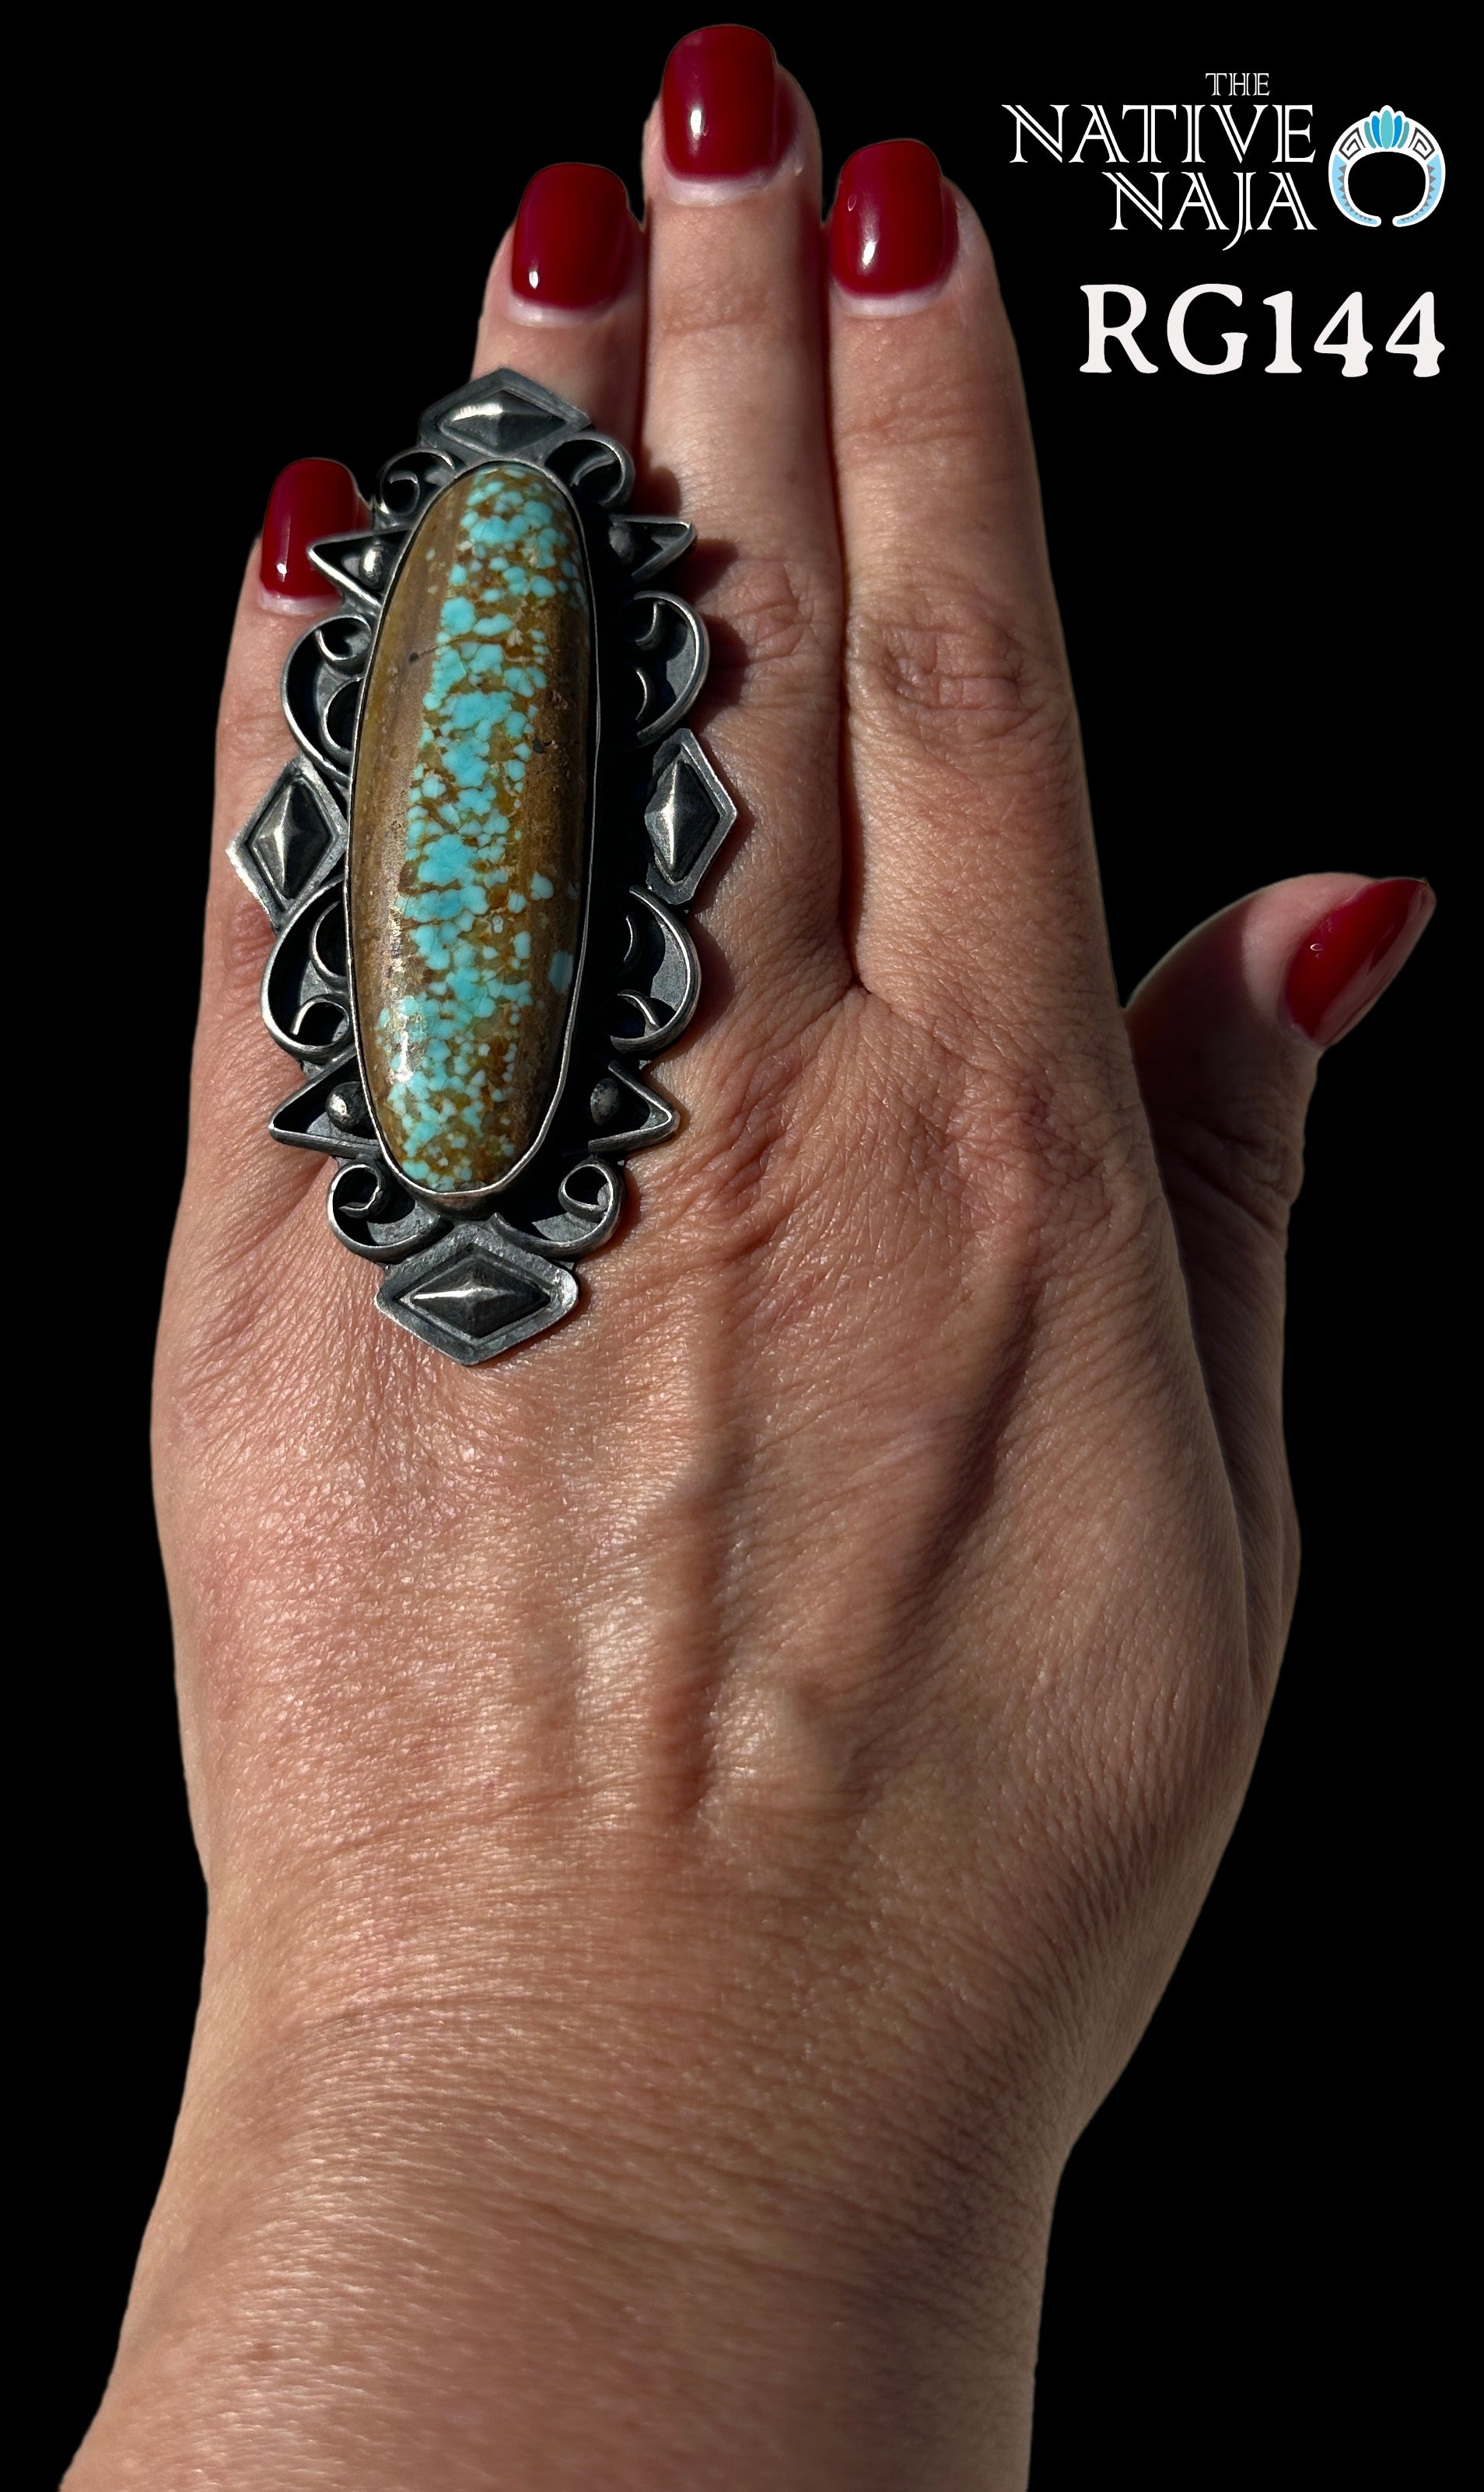 Massive Navajo Chimney Butte Sterling Silver & #8 Turquoise Ring Size 7 1/2 RG144